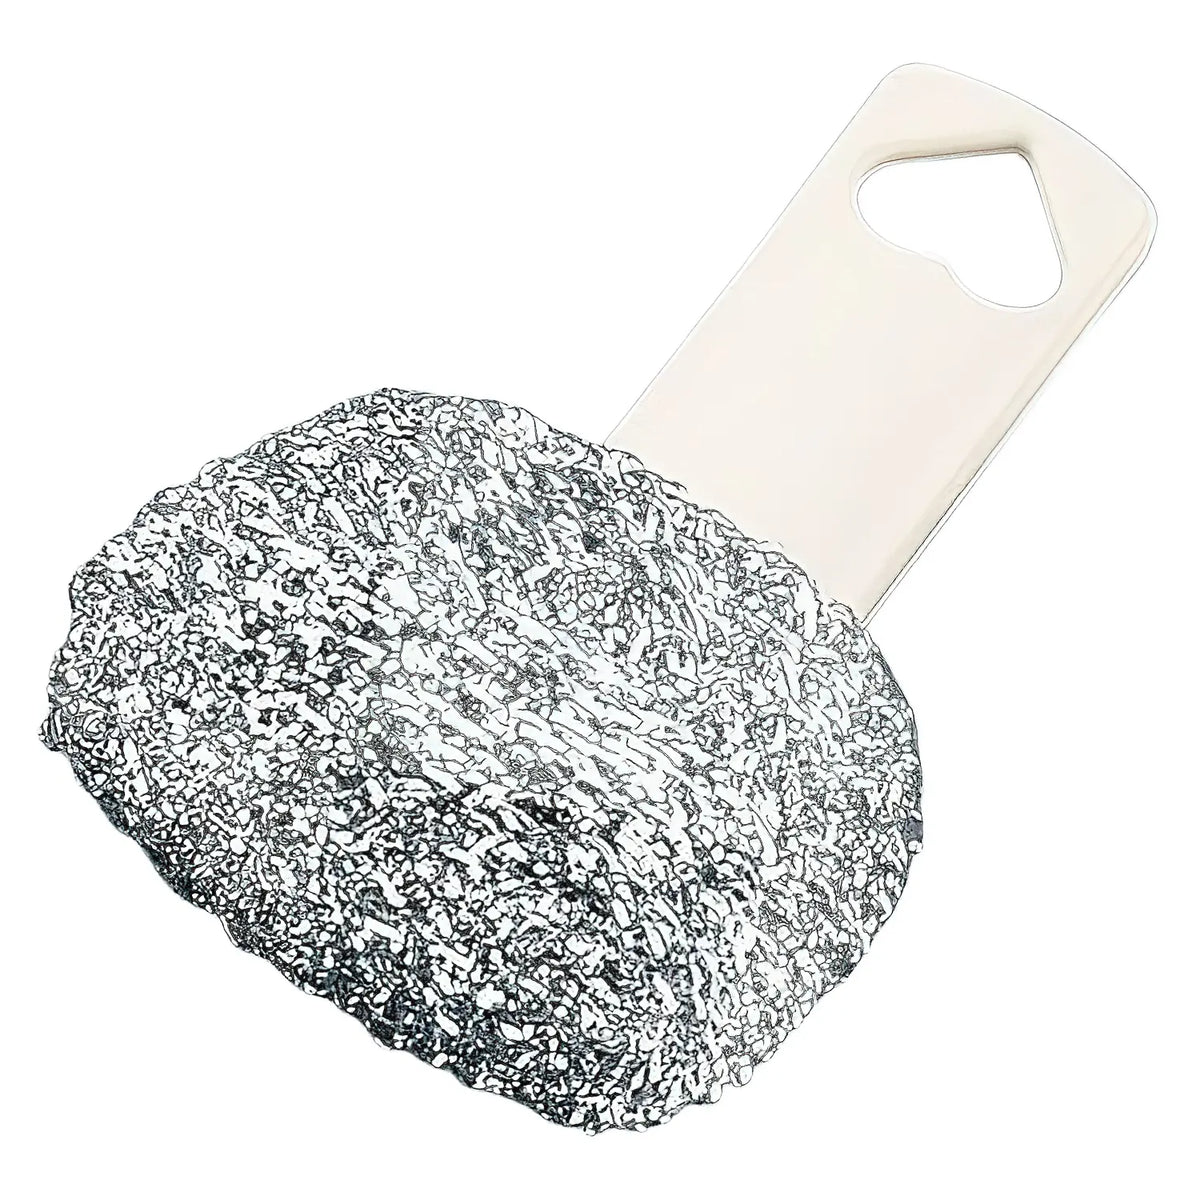 COWGEL High-Purity Aluminum Pile Cleaning Brush